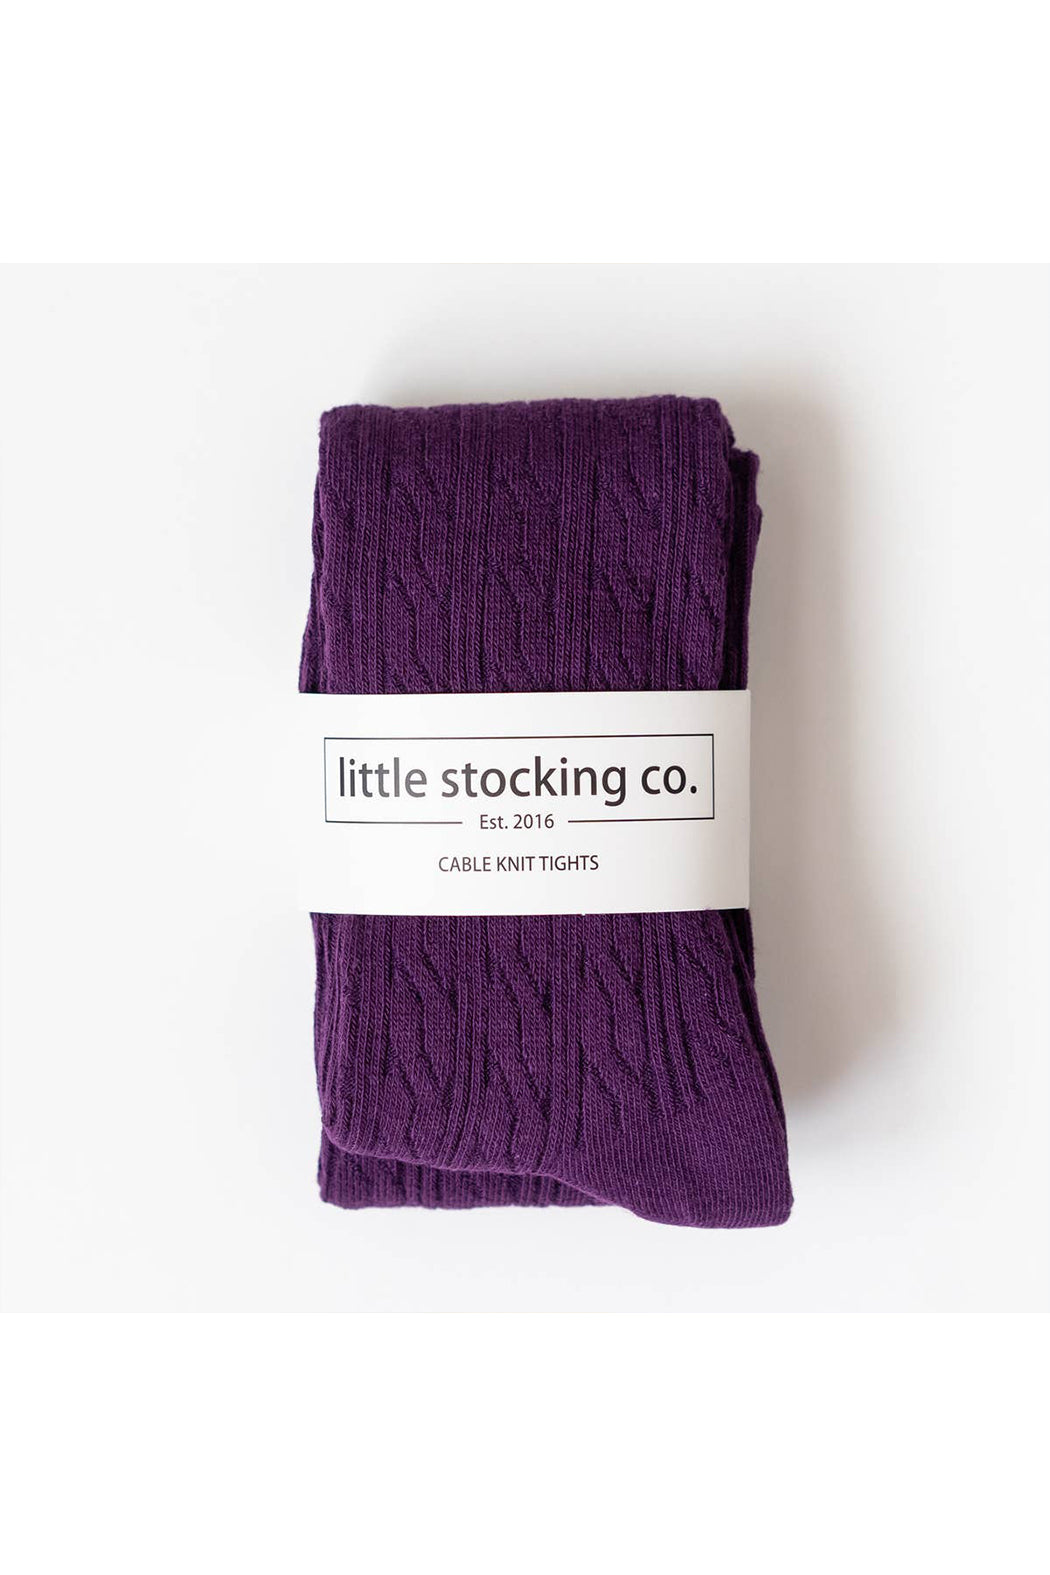 Little Stocking Co Plum Cable Knit Tights